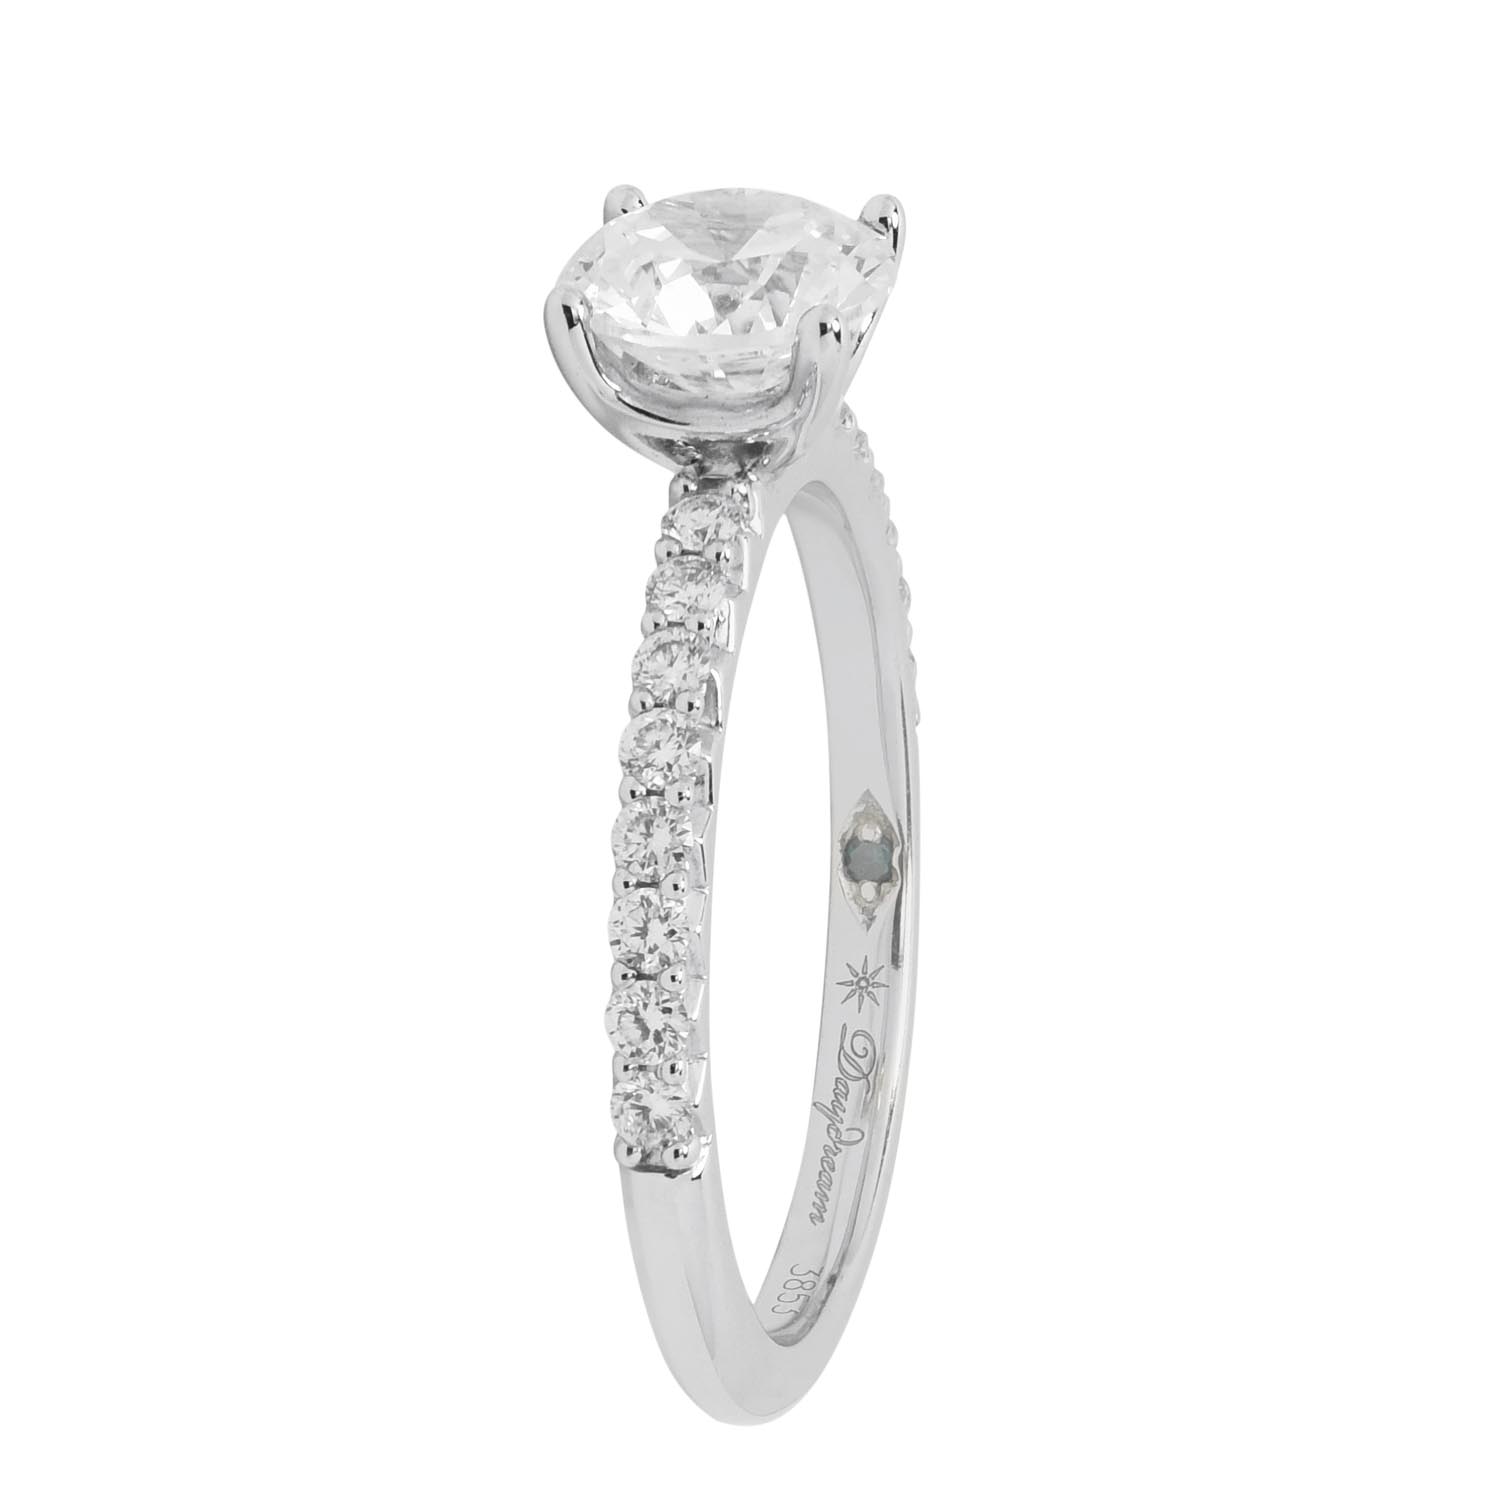 Daydream Diamond Setting in 14kt White Gold (1/4ct tw)